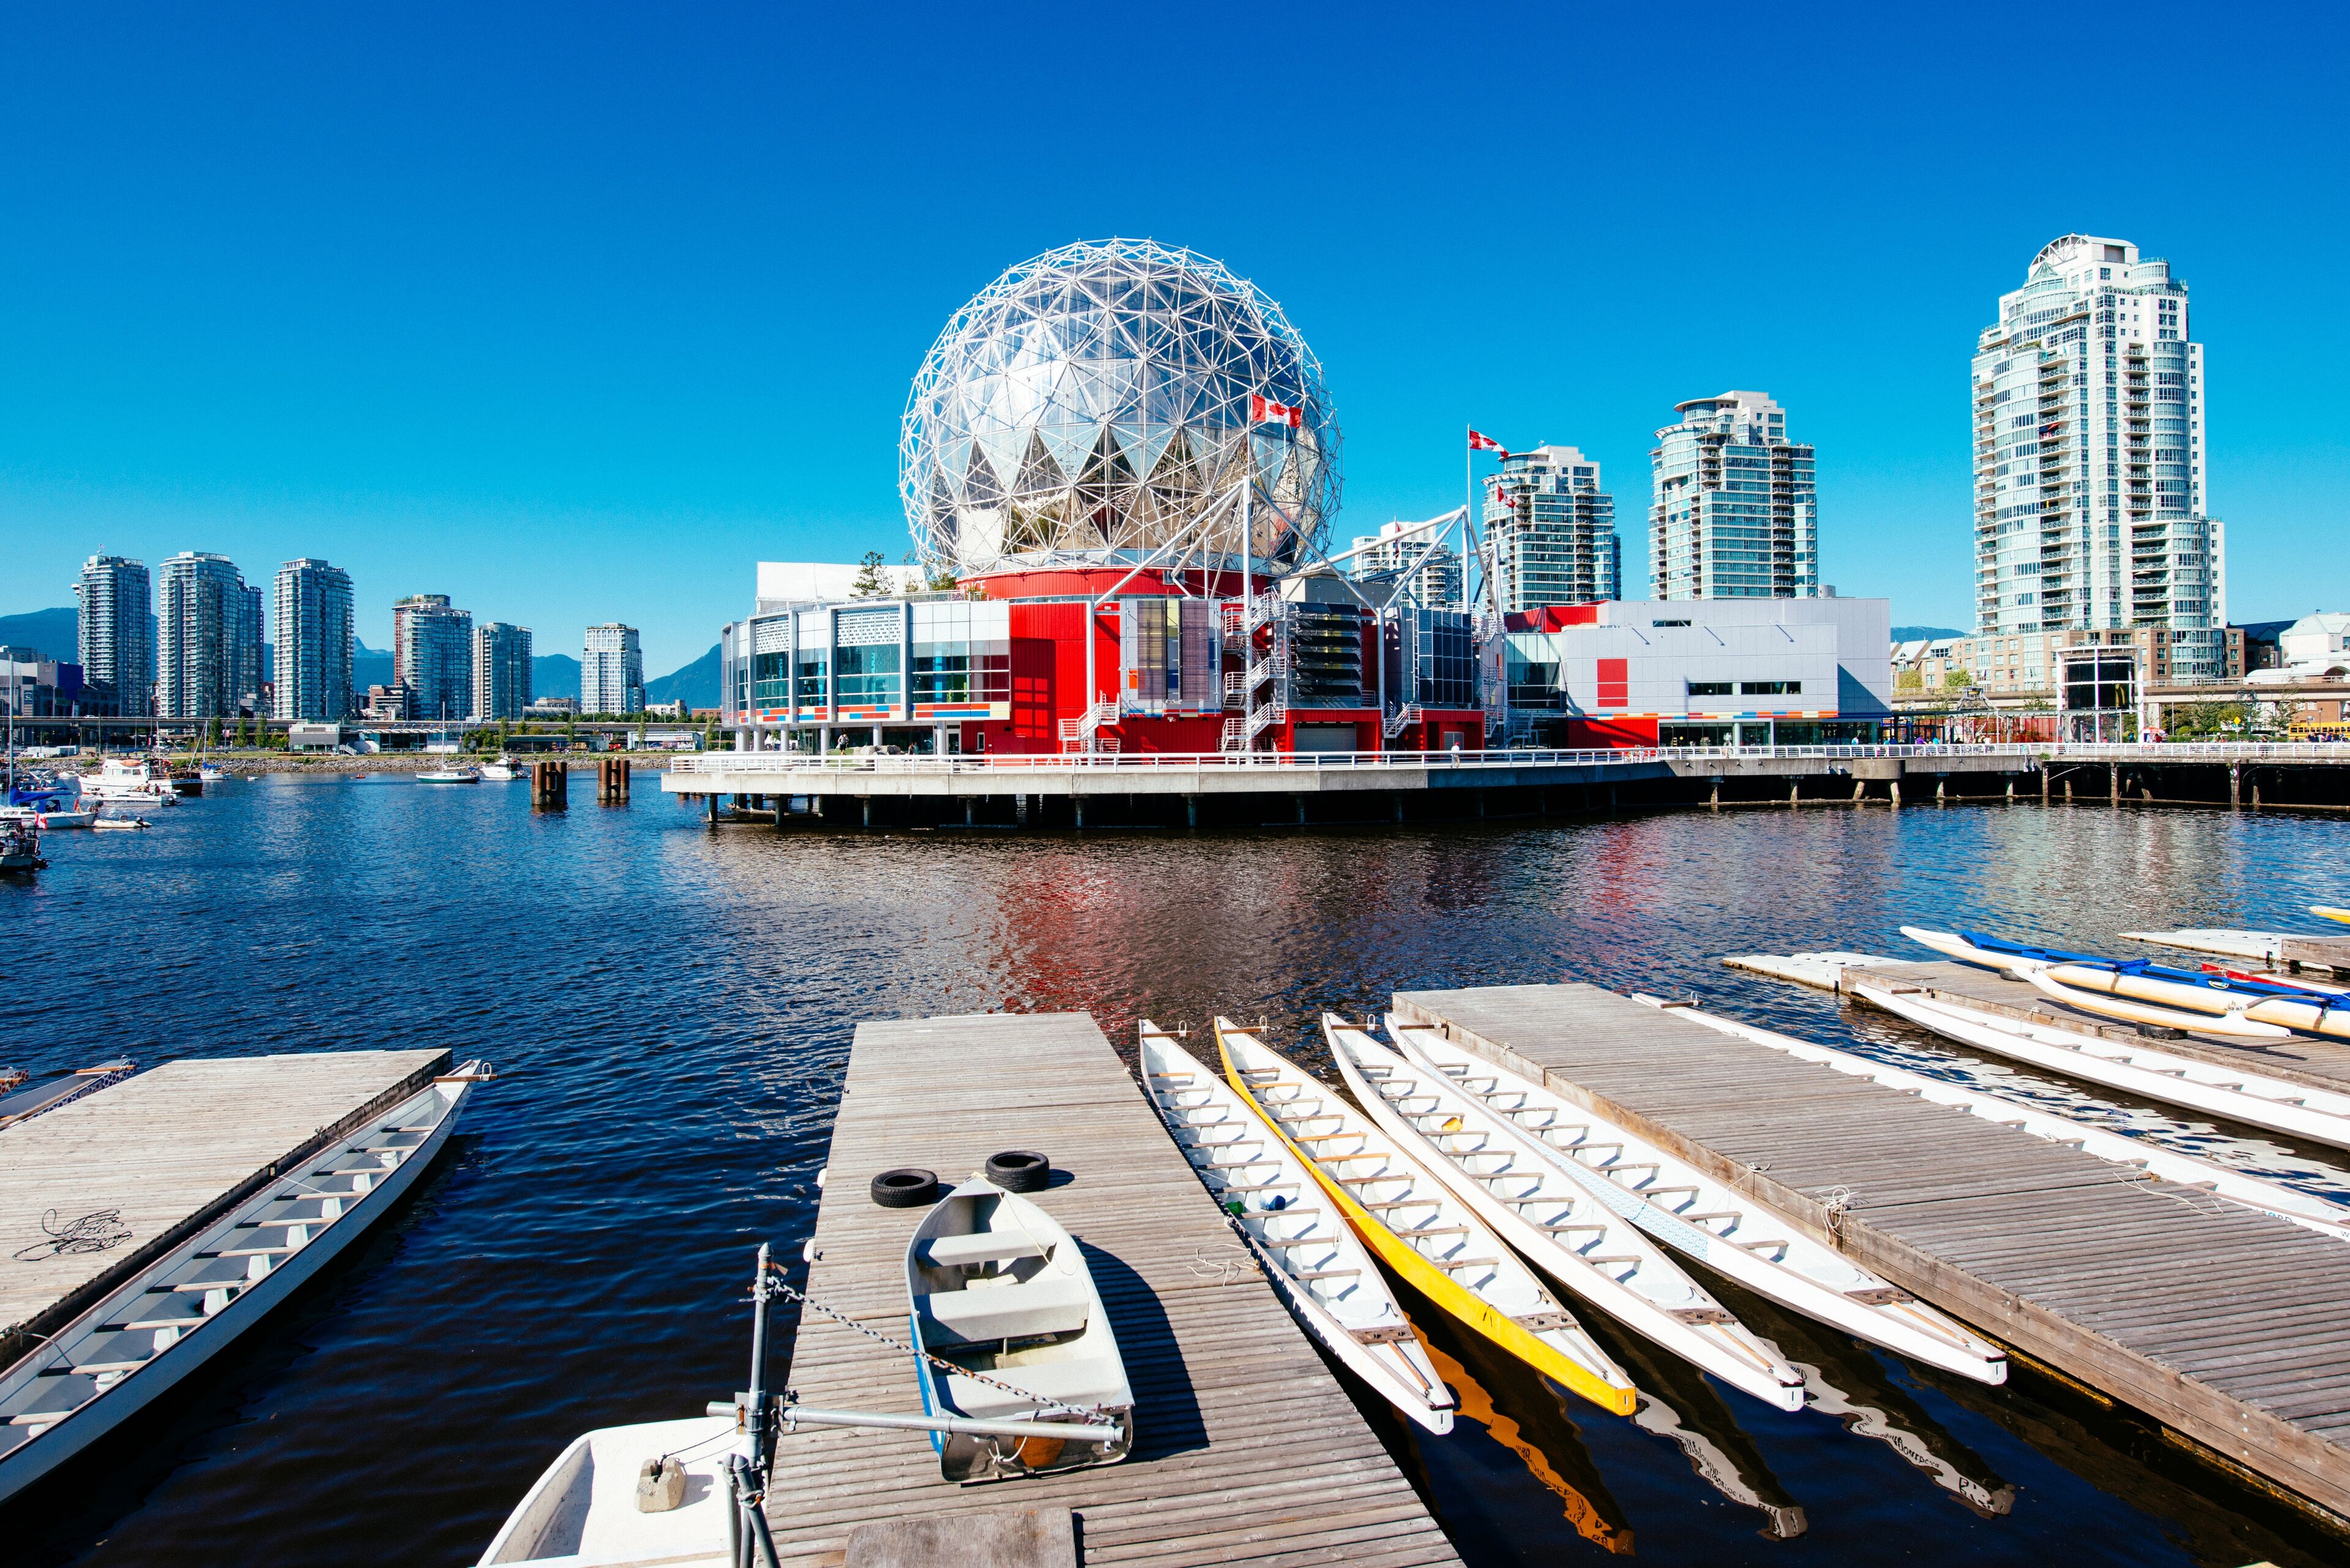 A geodesic dome structure stands by the waterfront, surrounded by modern buildings, with kayaks lined up on the dock.